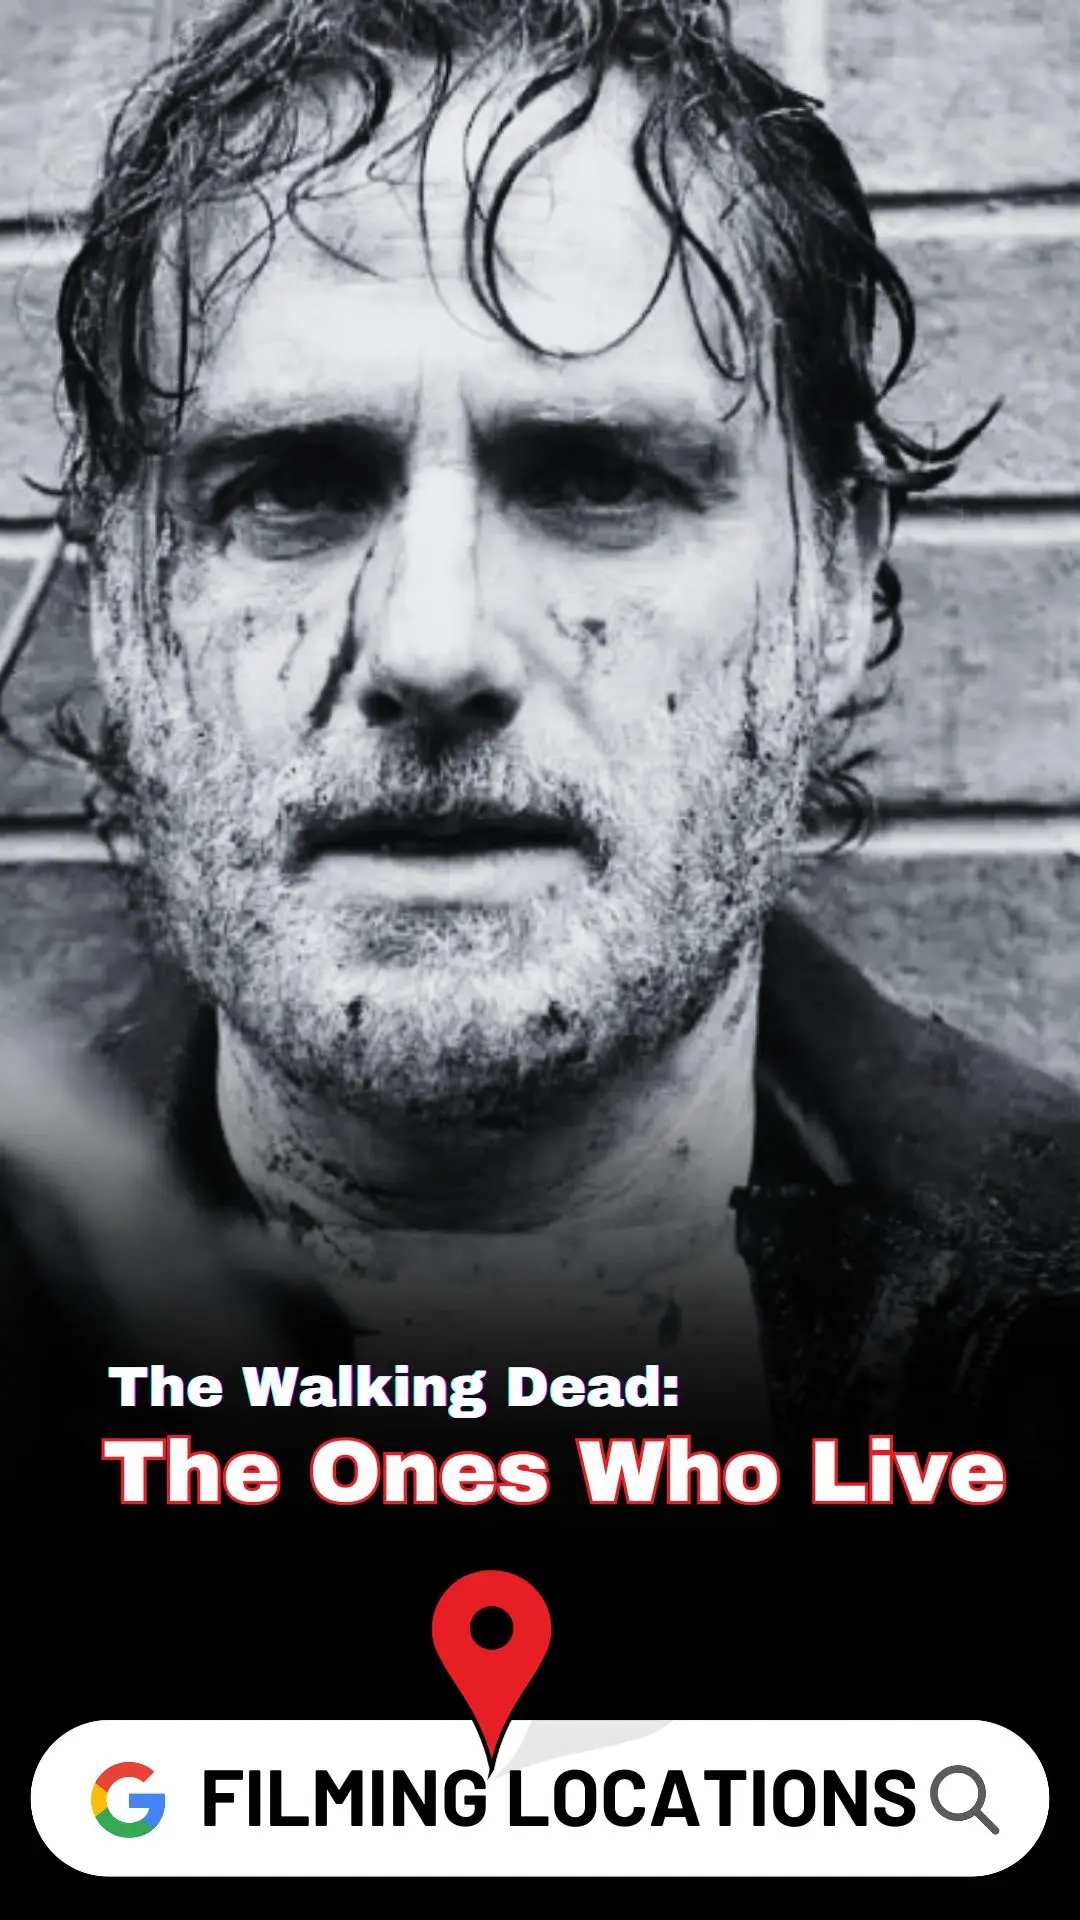 The Walking Dead The Ones Who Live Filming Locations